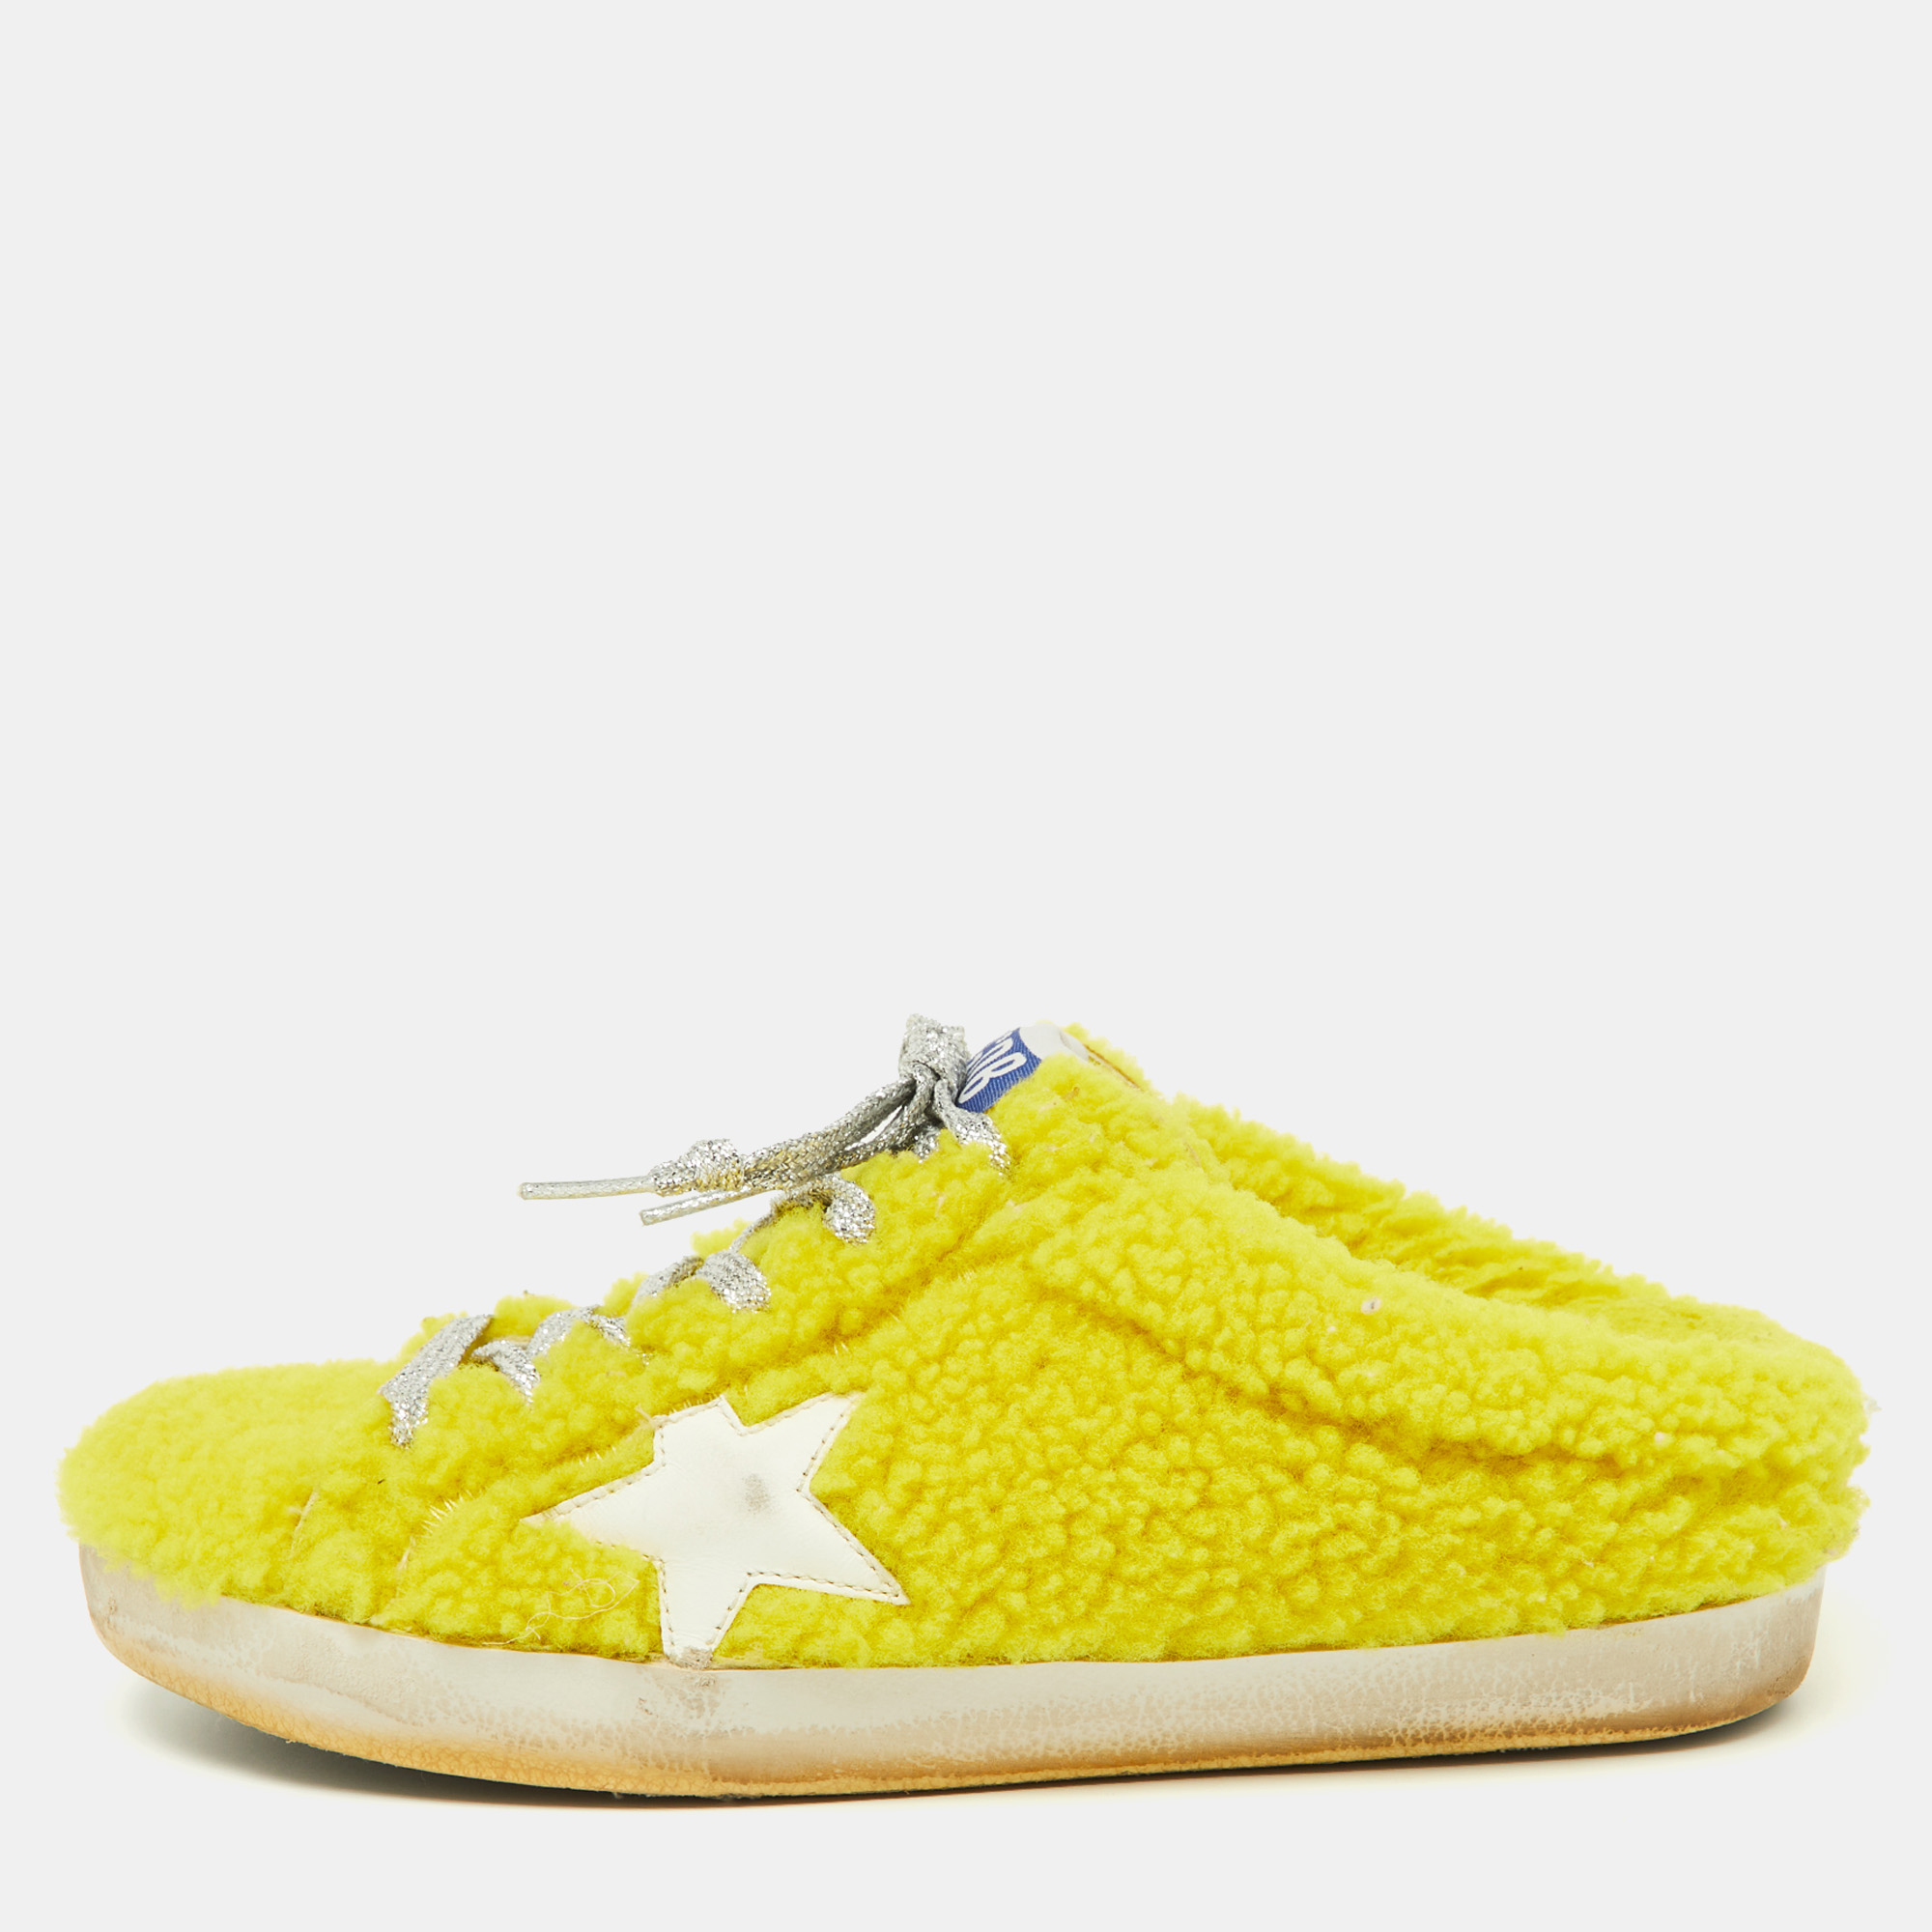 Pre-owned Golden Goose Yellow Shearling Fur Superstar Sabot Sneakers Size 39